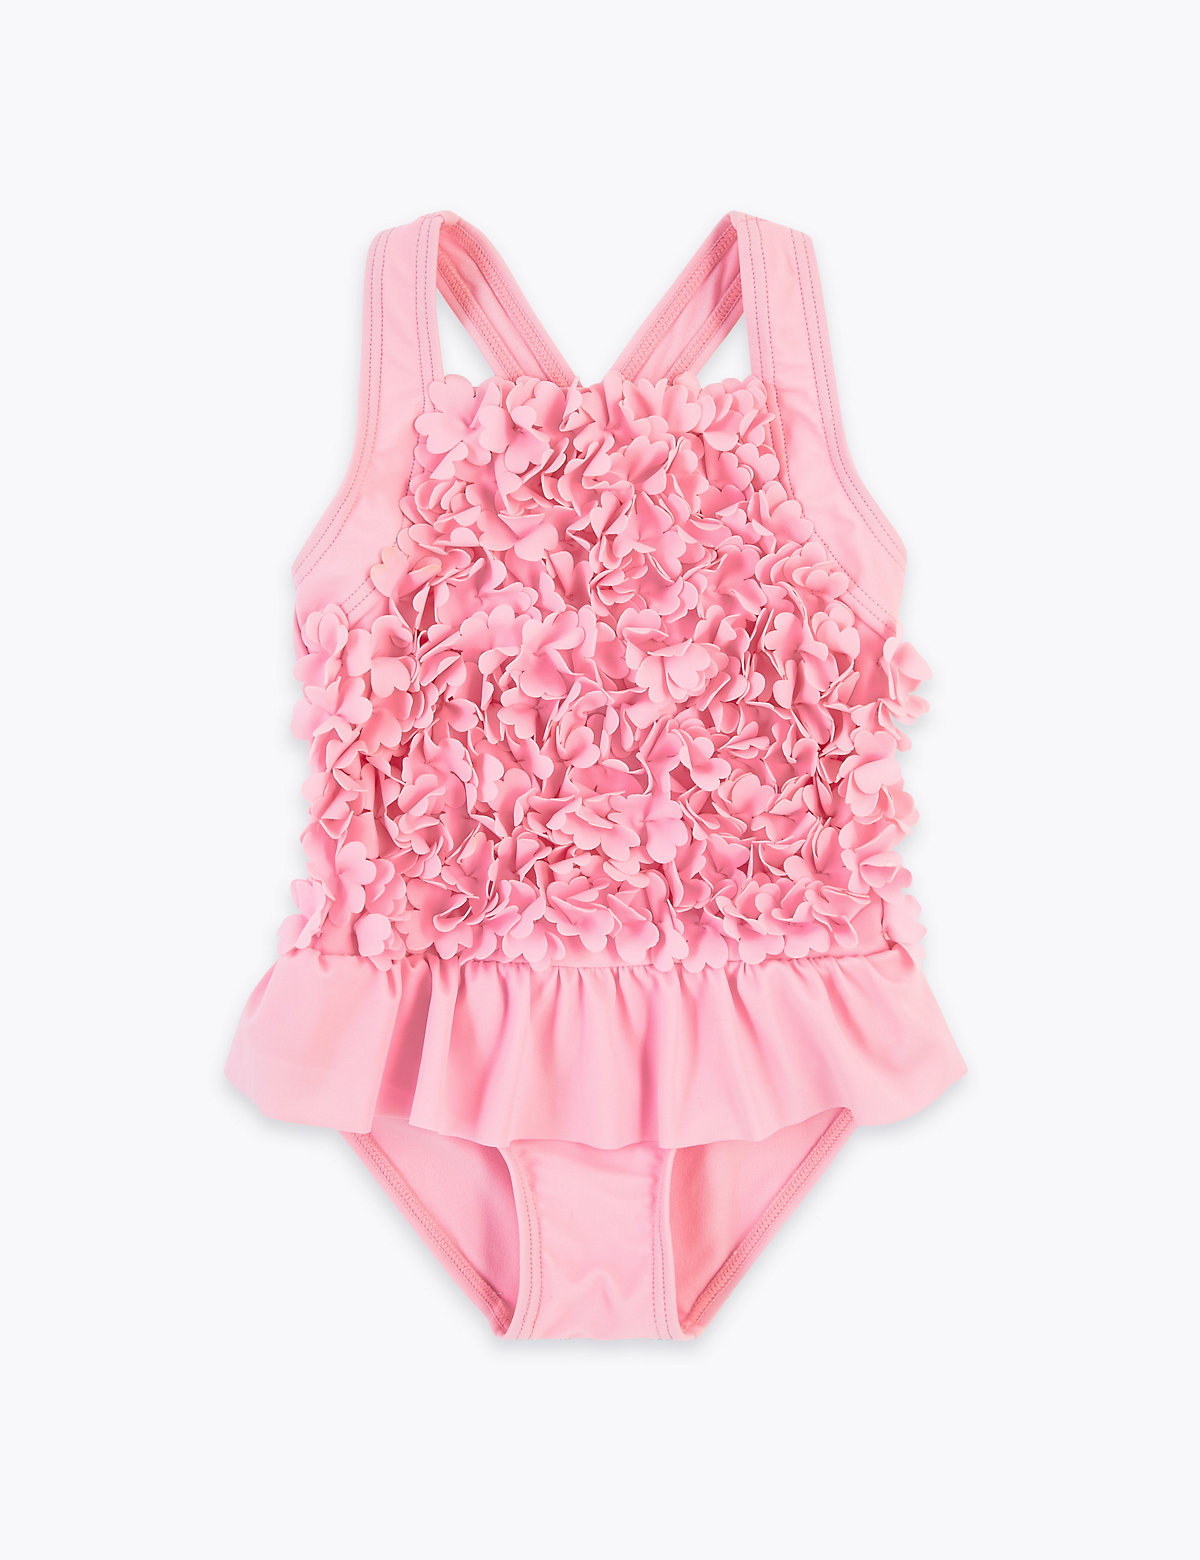 Floral Frill Swimsuit (2-7 Yrs)